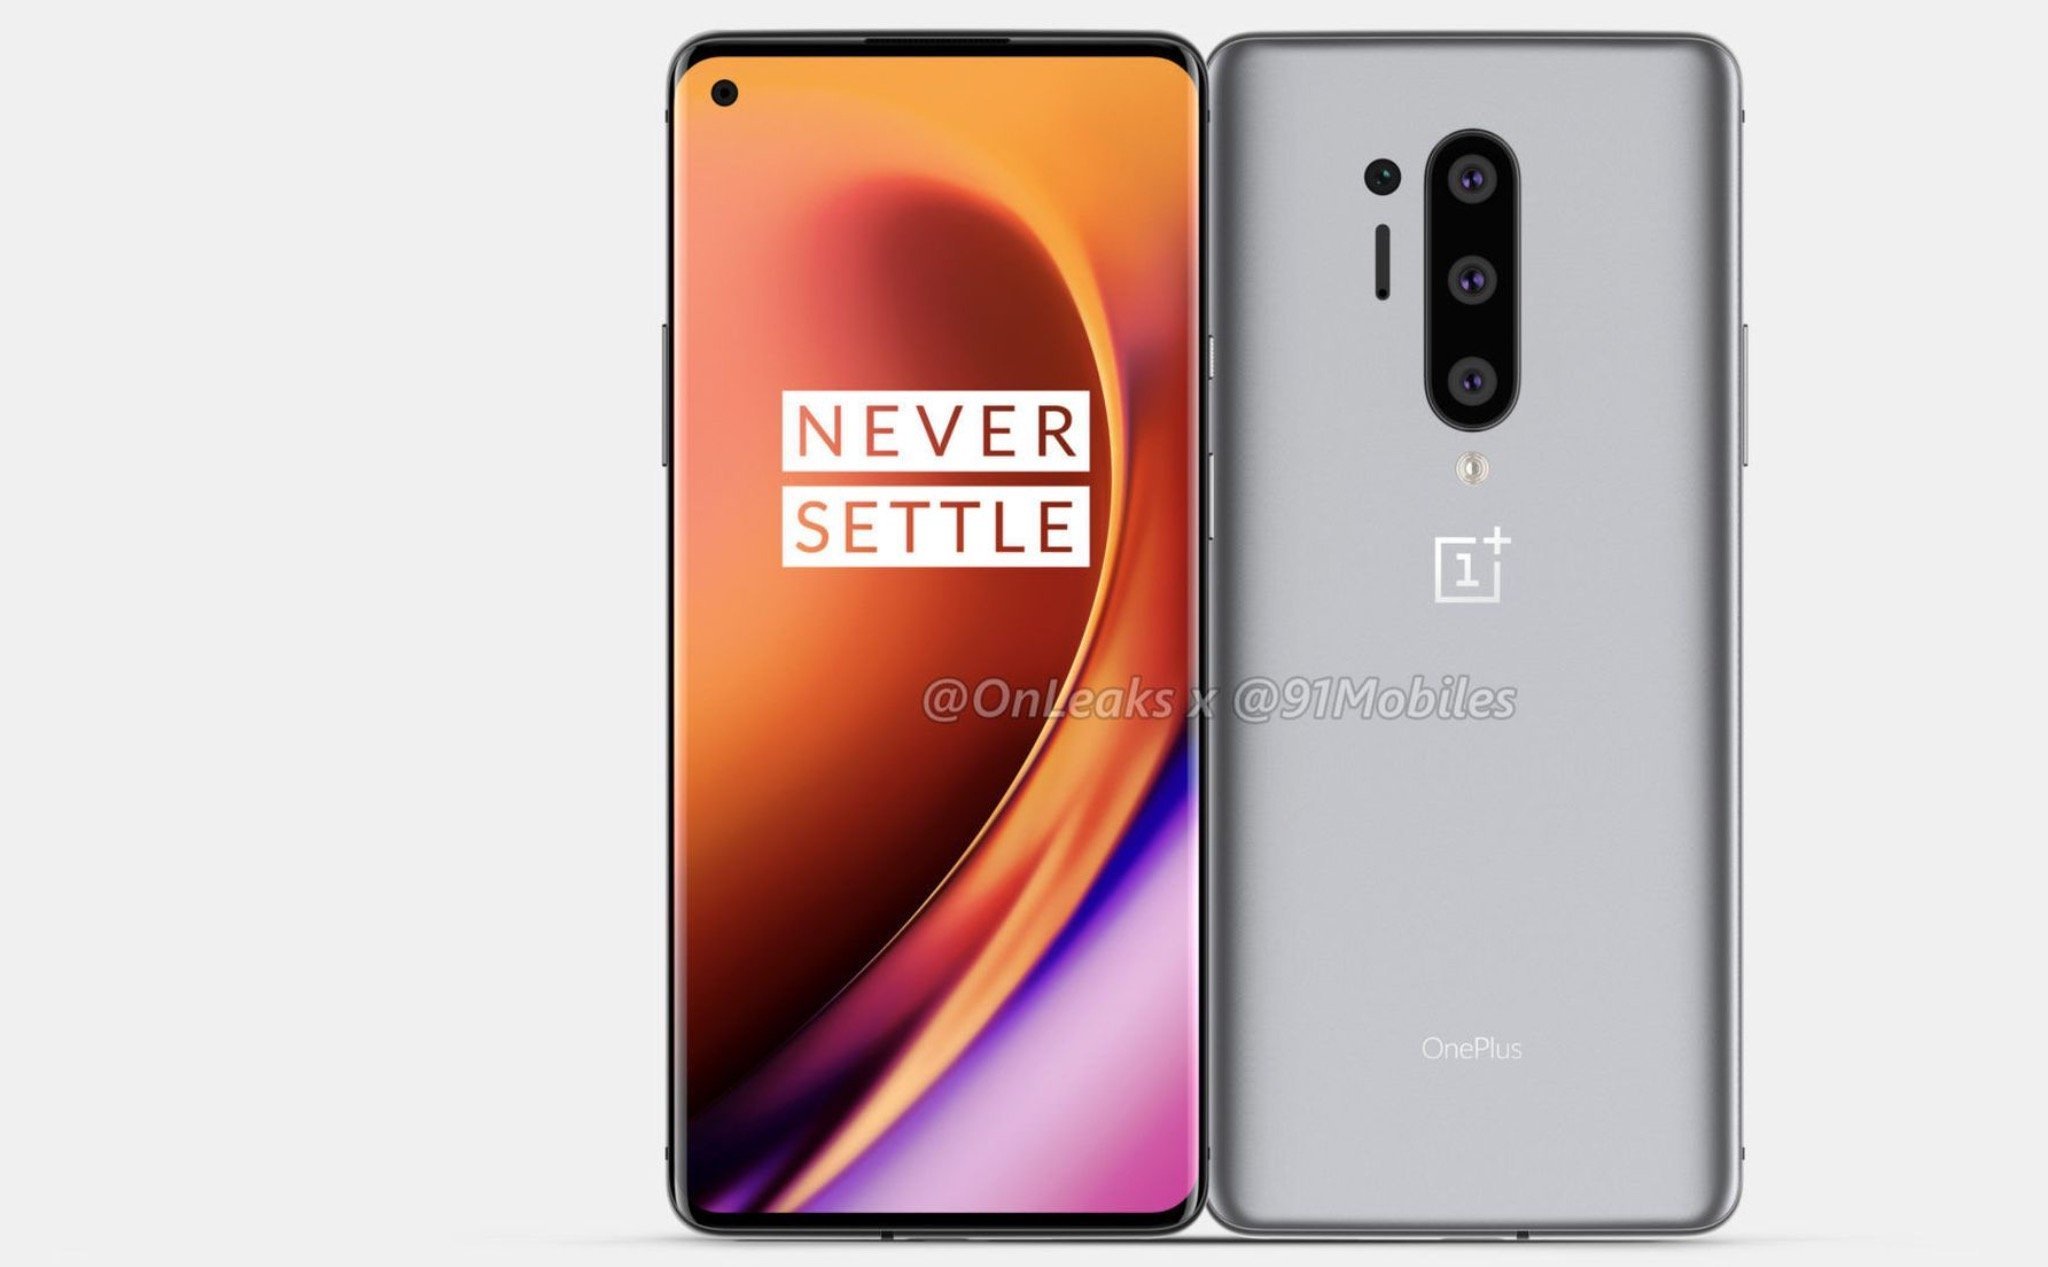 Tin đồn OnePlus 8 Pro will have a 120Hz screen just like ROG Phone 2